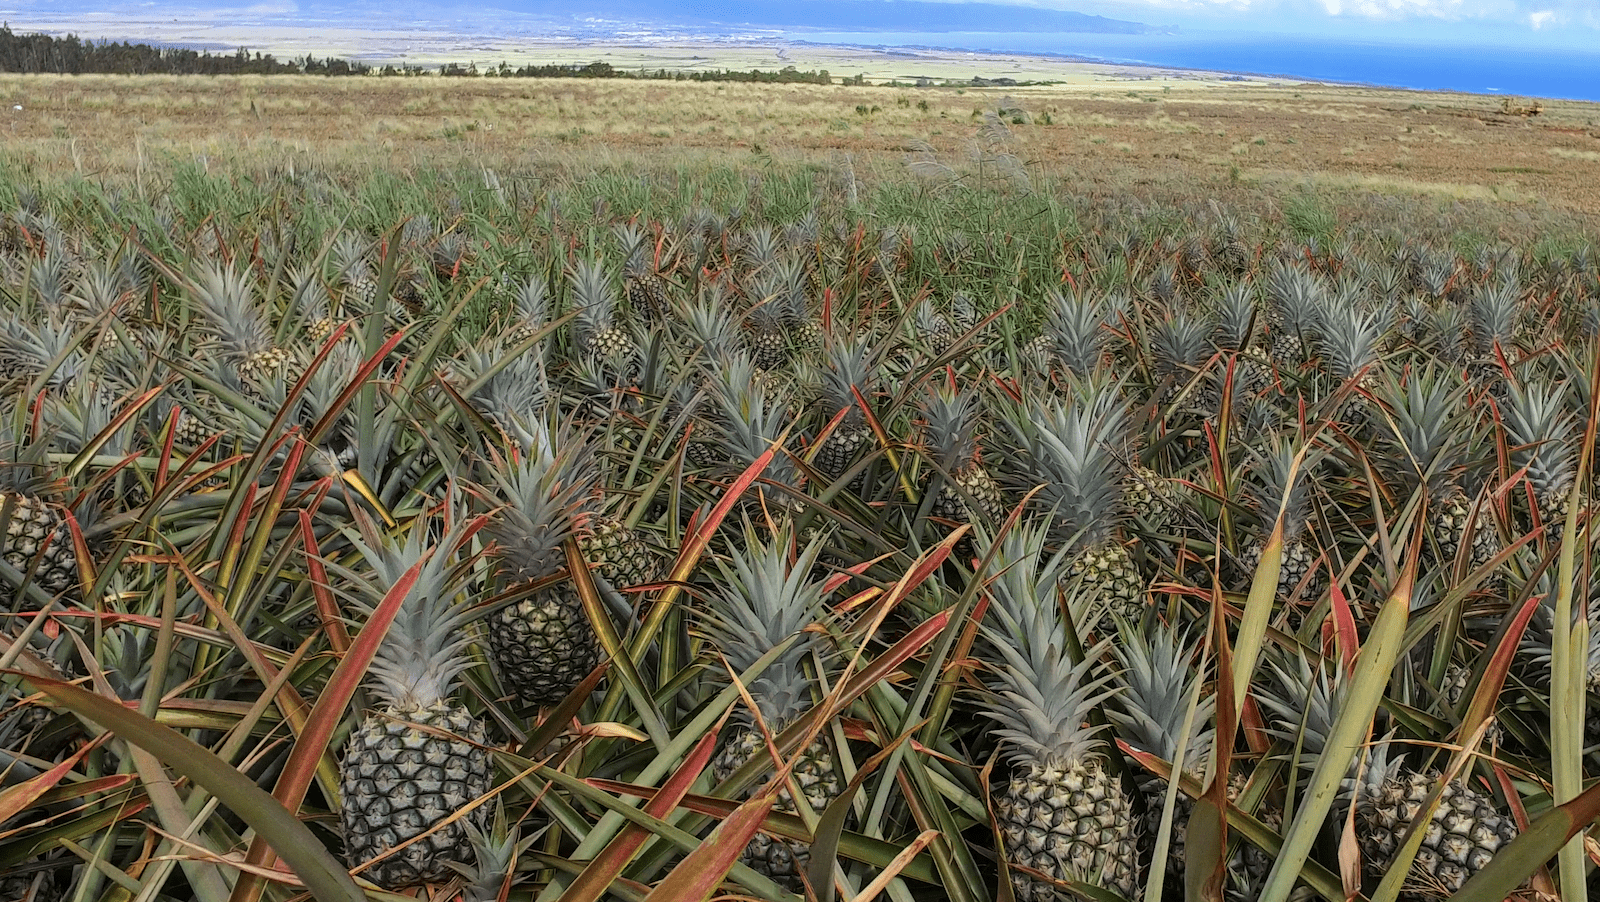 Pineapples-Shop-Made in Maui-credit Maui Gold-800x450